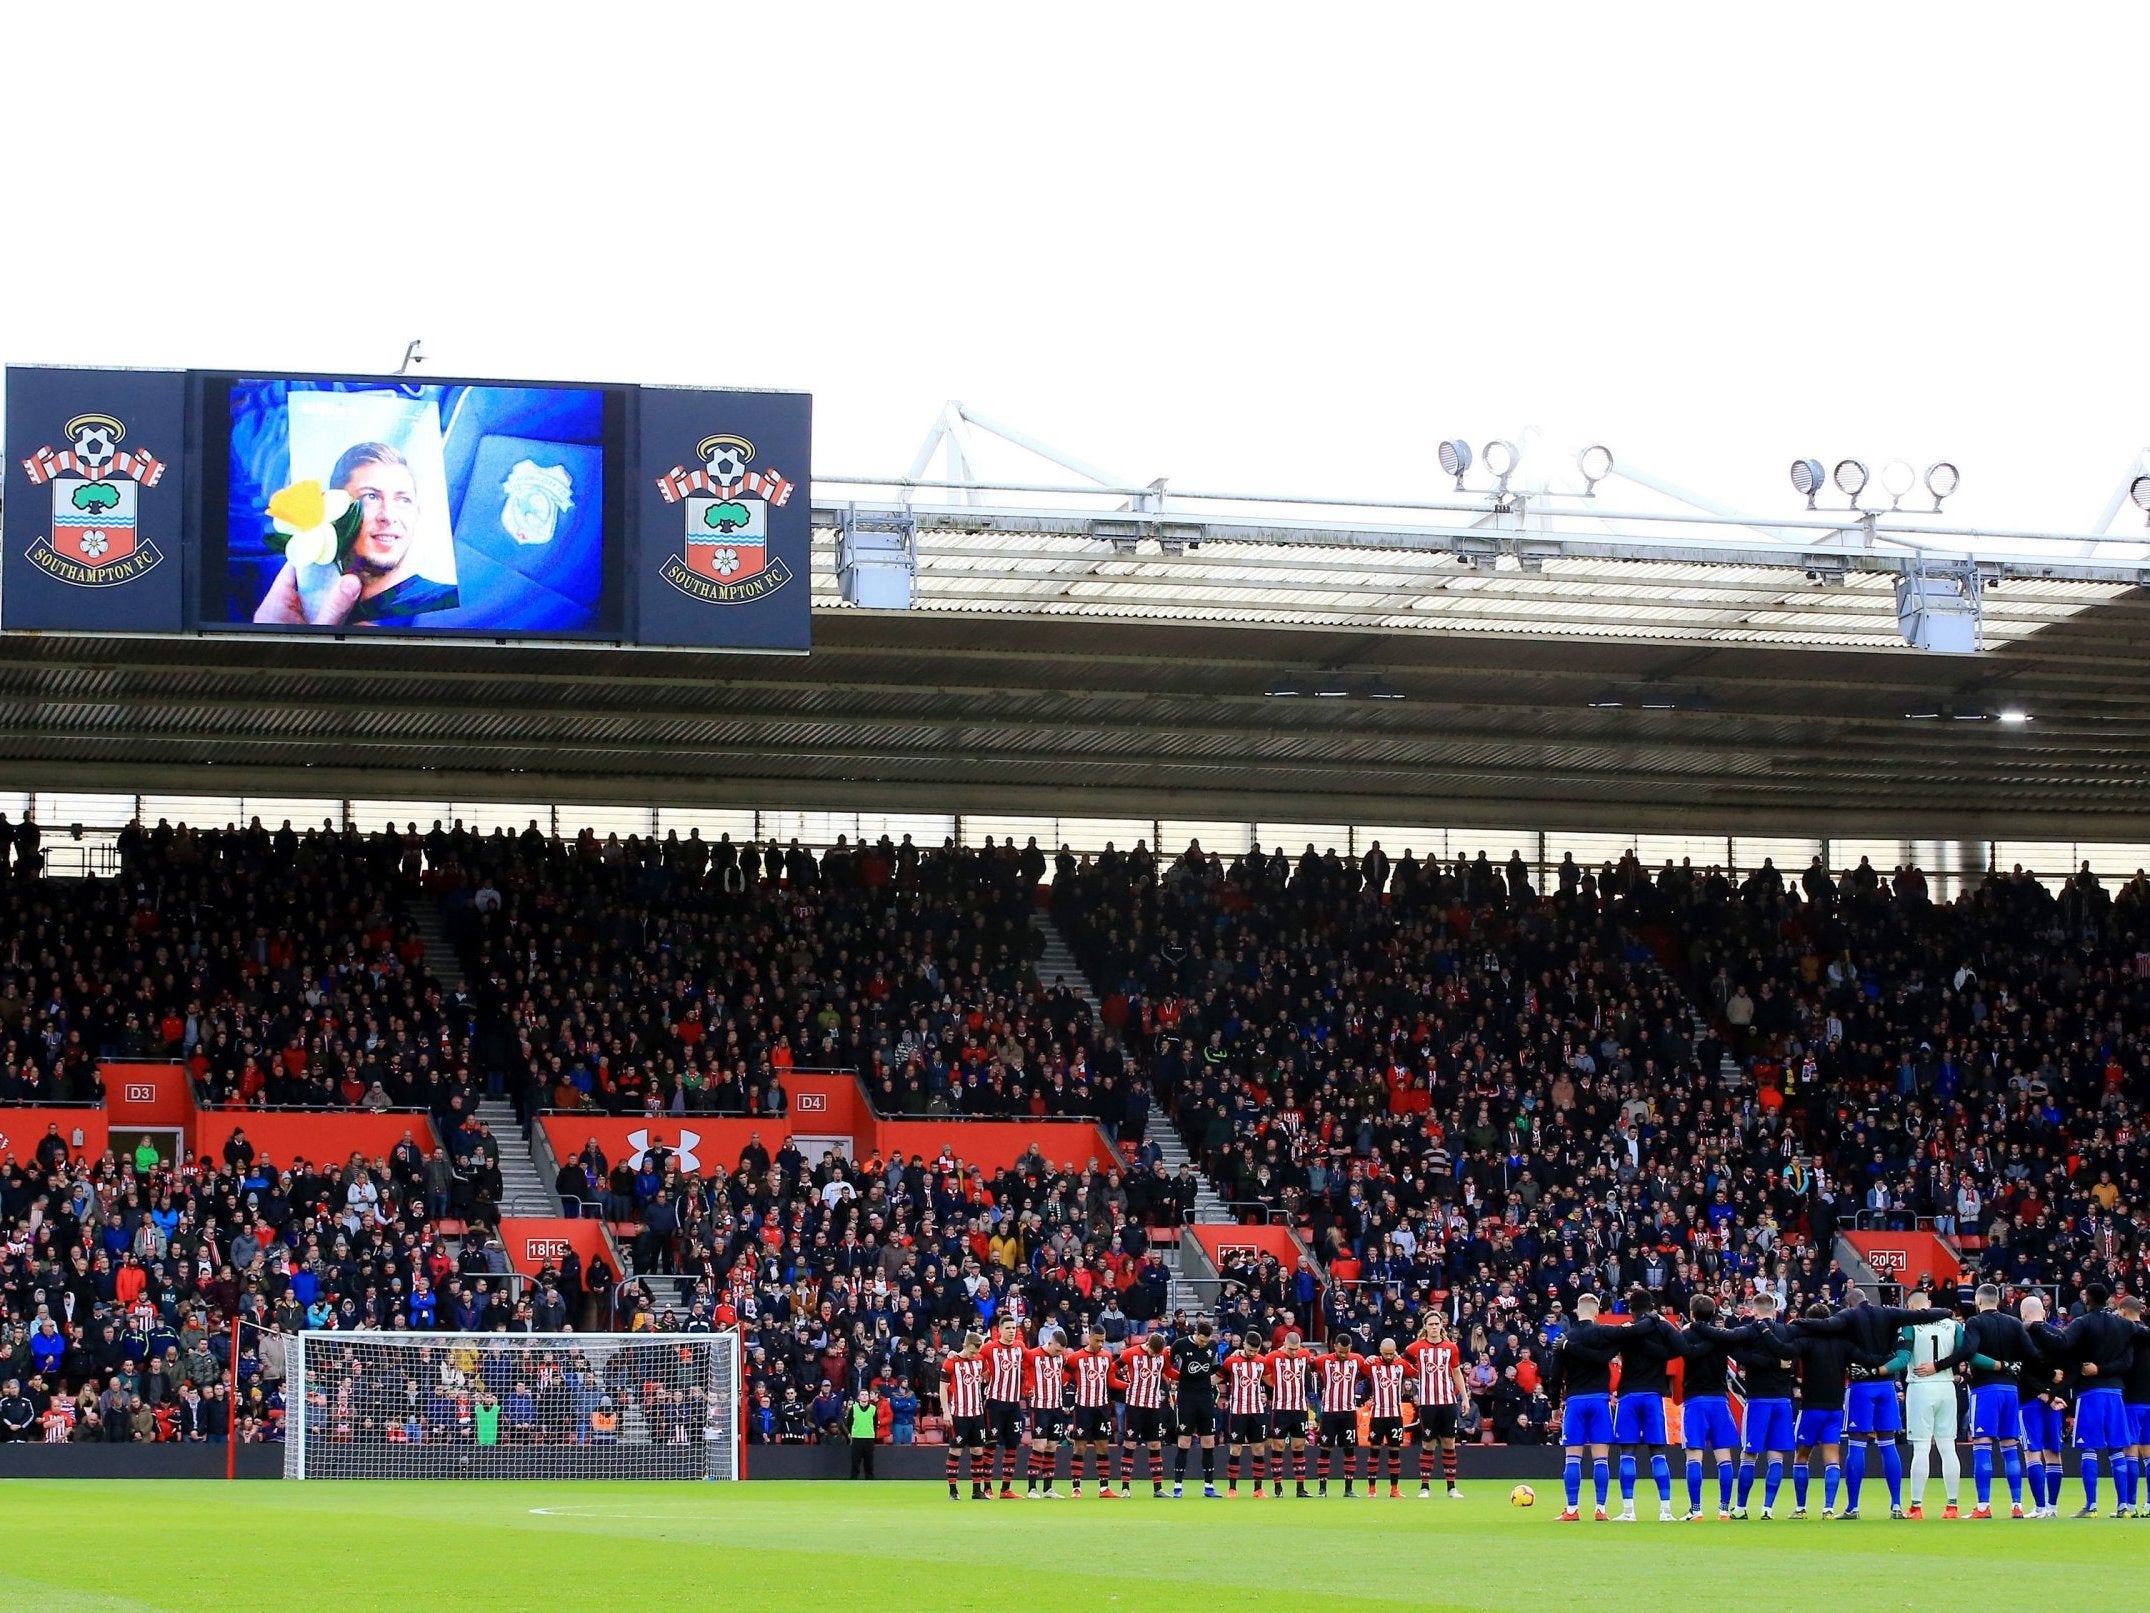 A tribute was paid to Sala on Saturday